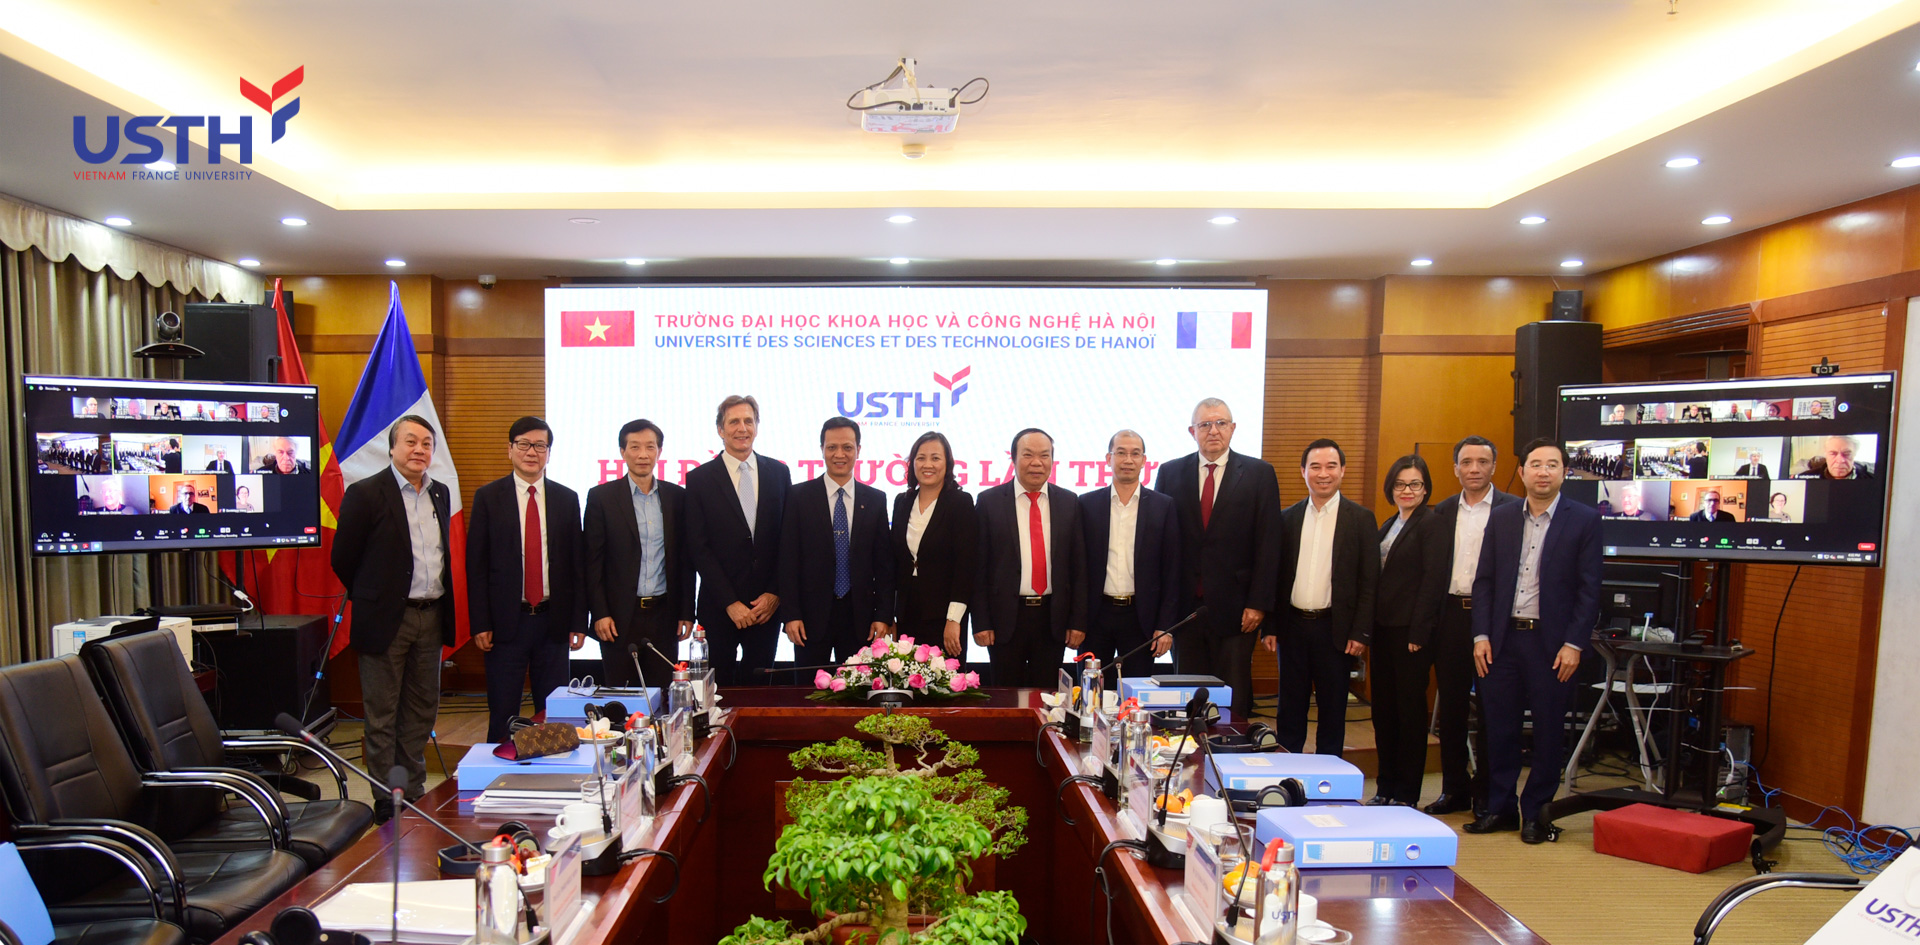 usth successfully held the 6th university council meeting